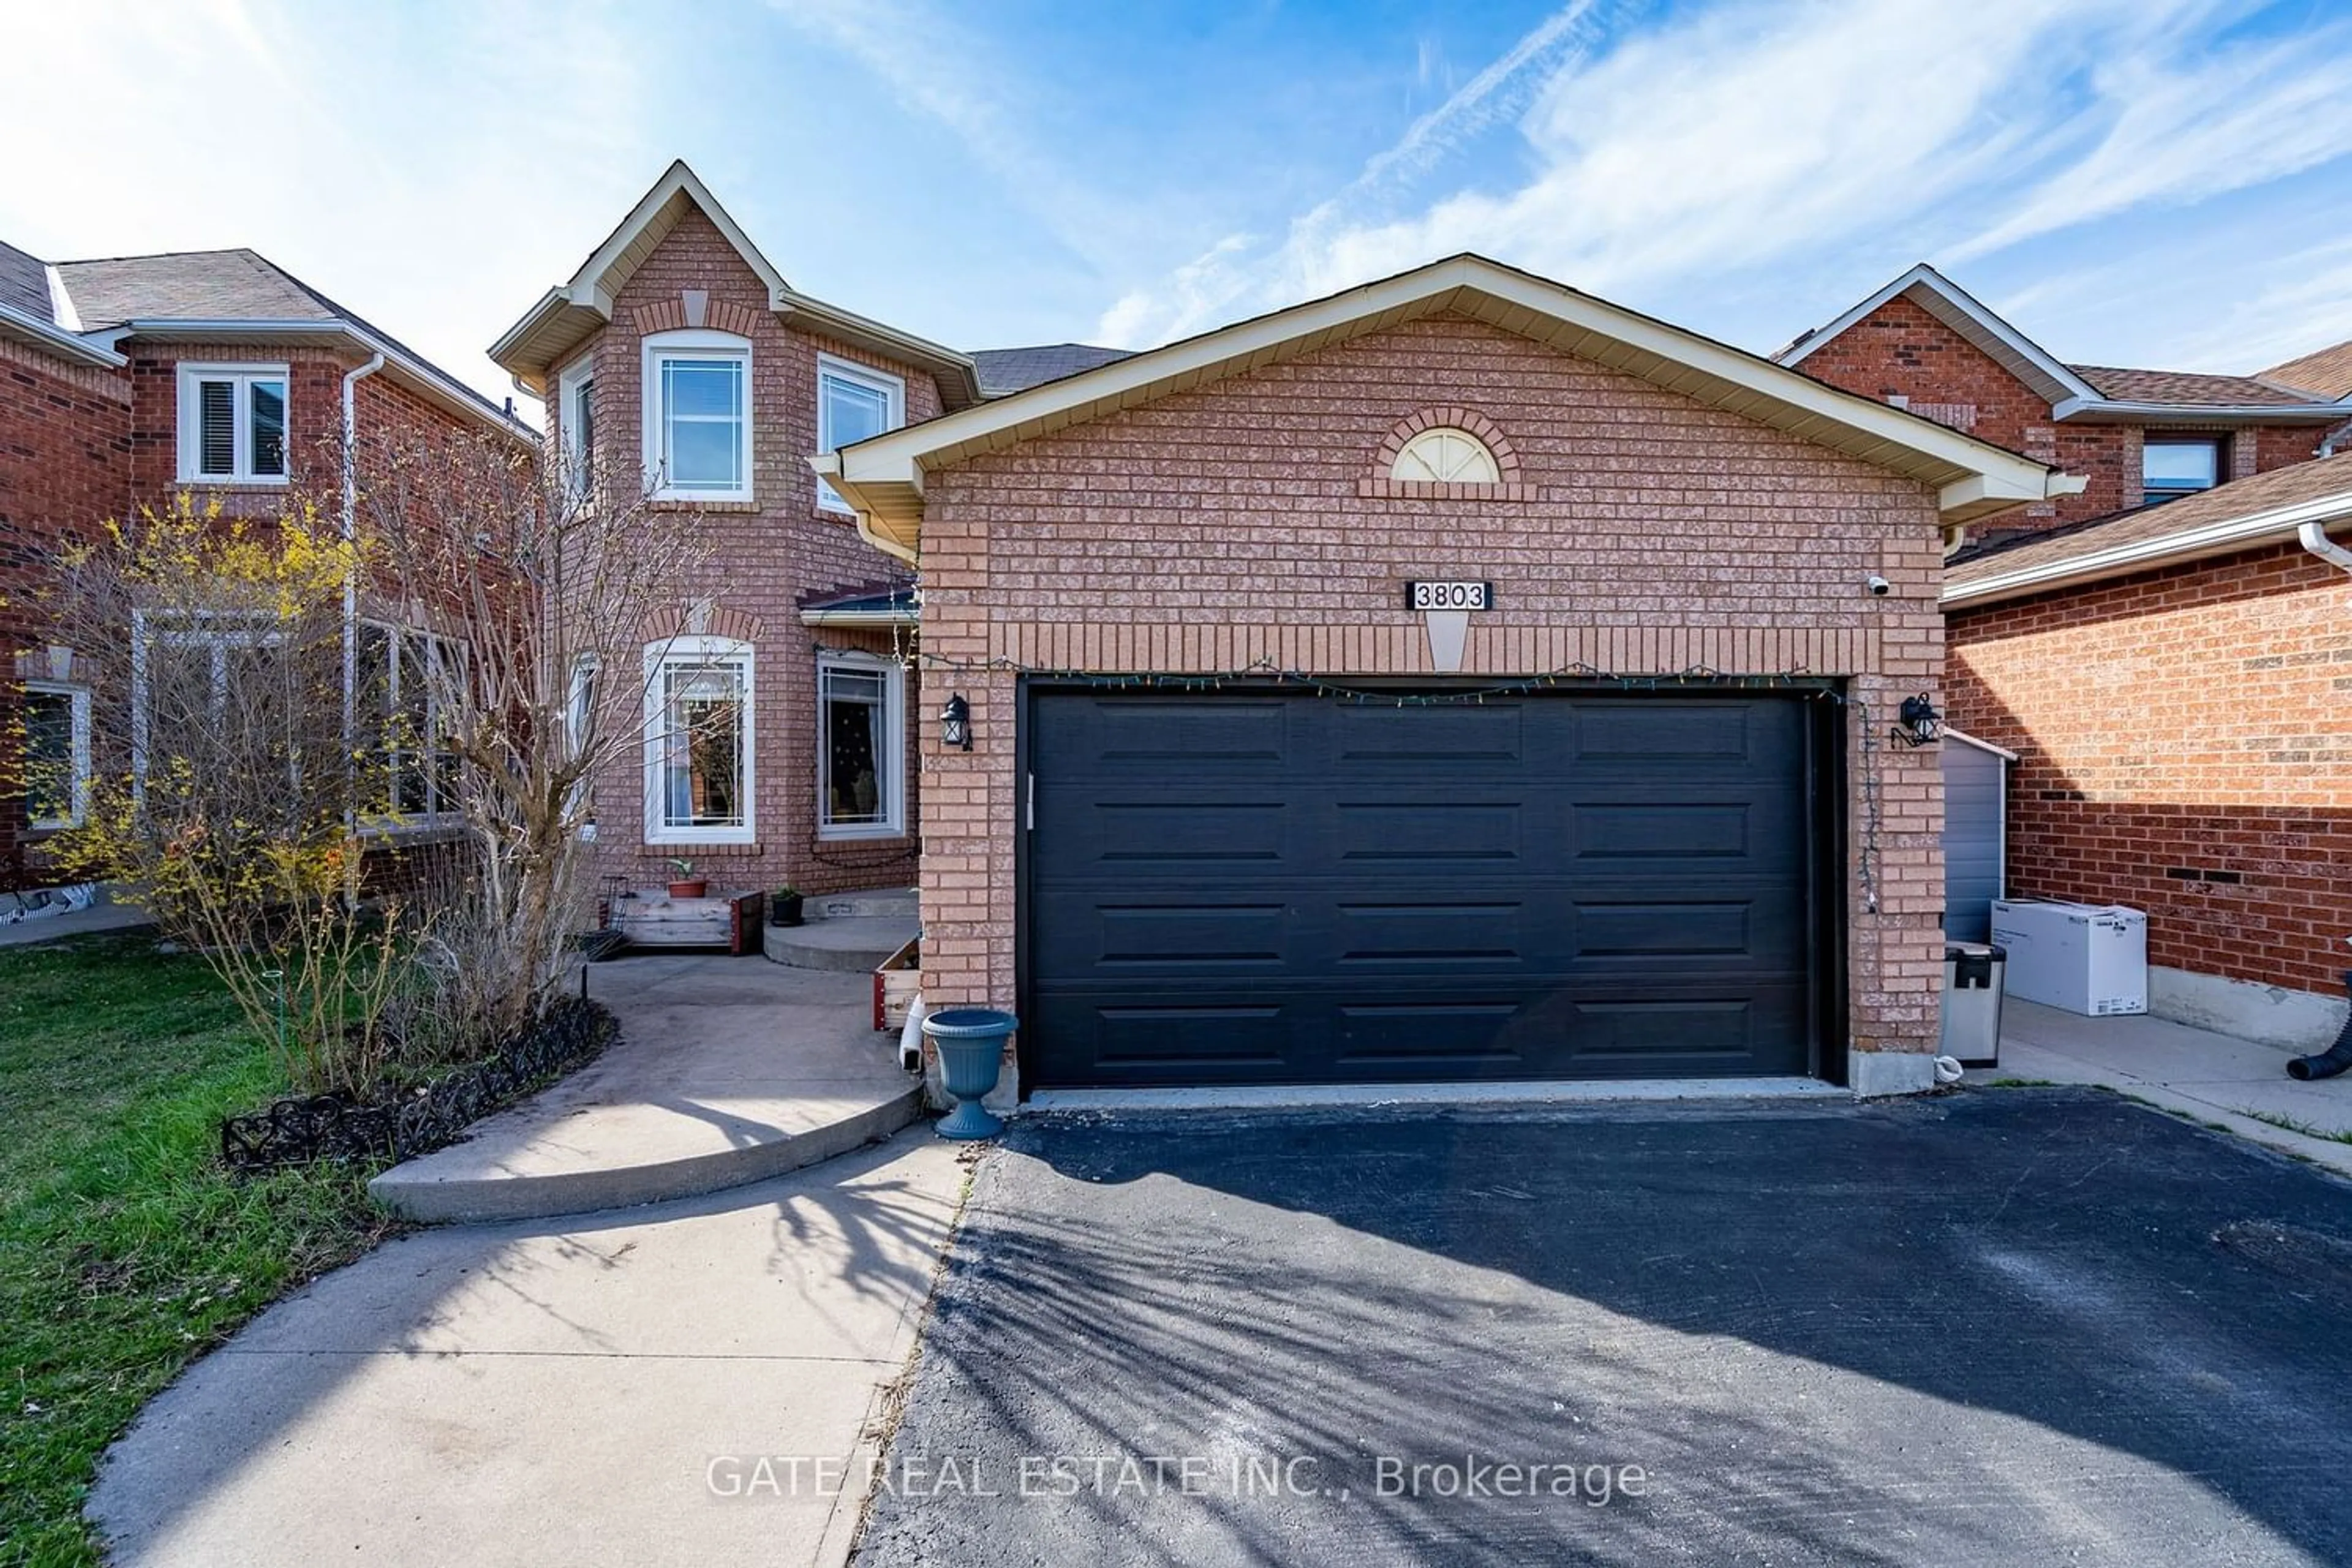 Home with brick exterior material for 3803 Laurenclaire Dr, Mississauga Ontario L5N 7G8